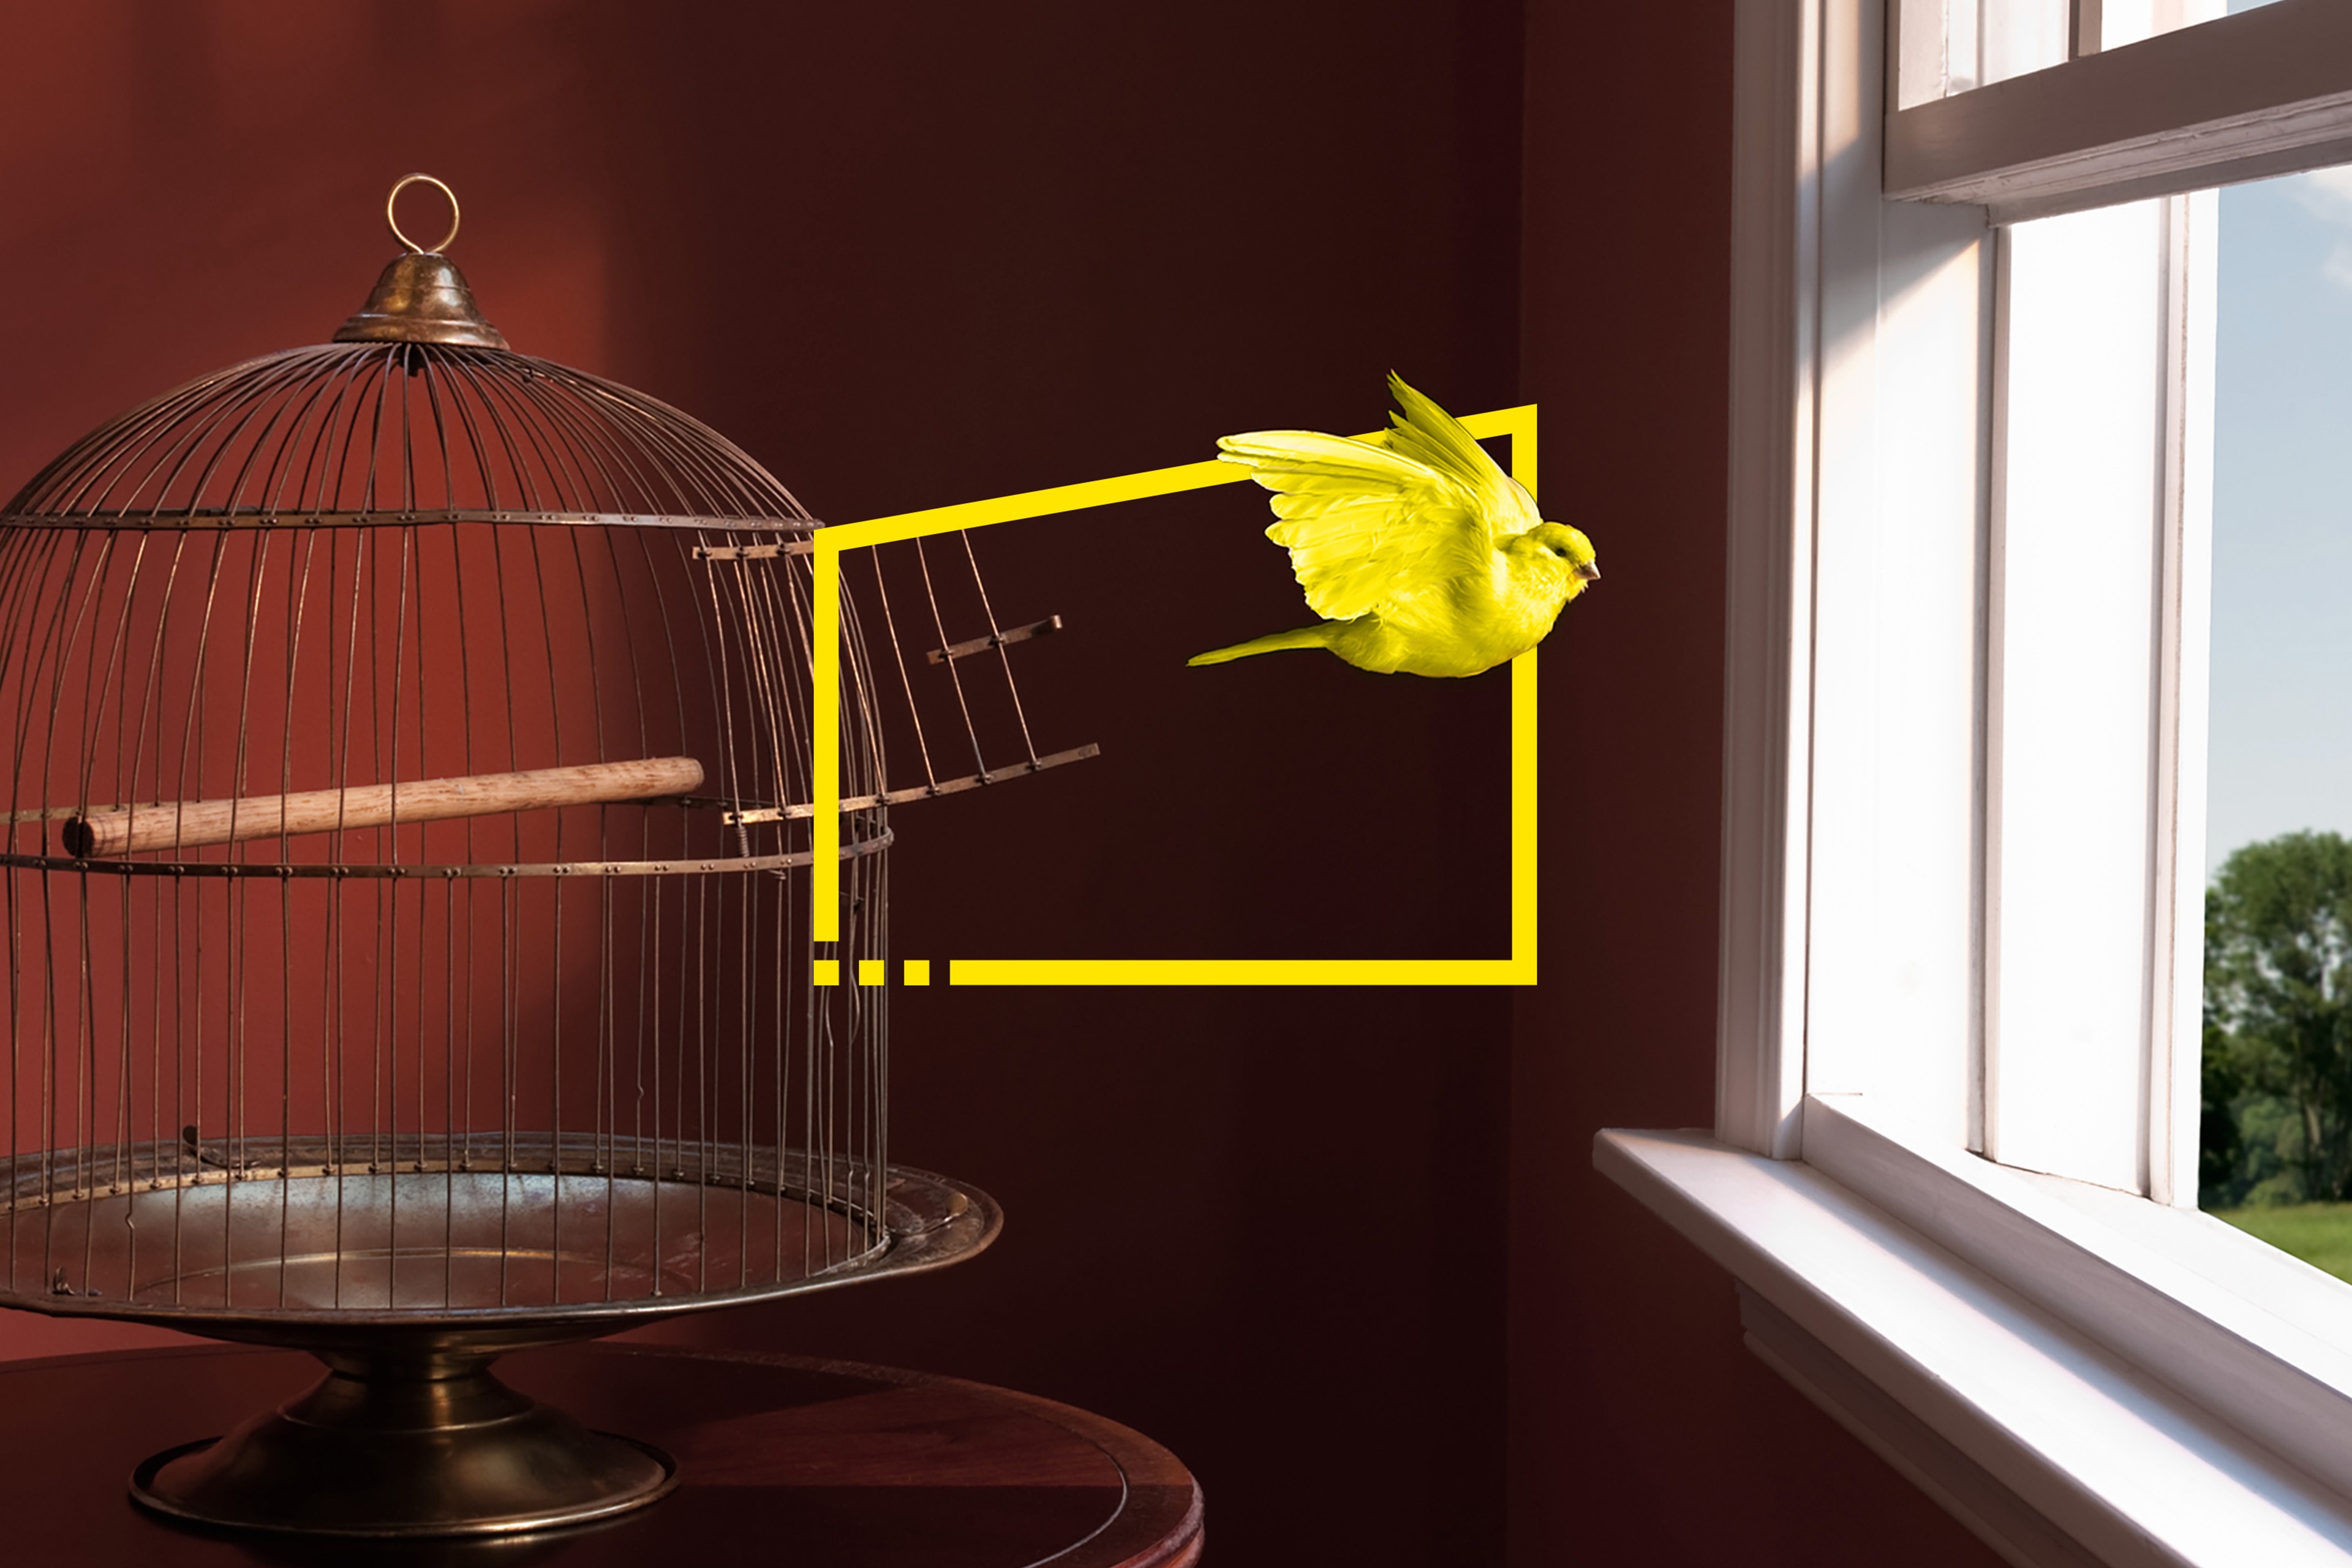 canary escaping cage flying-toward open window static image